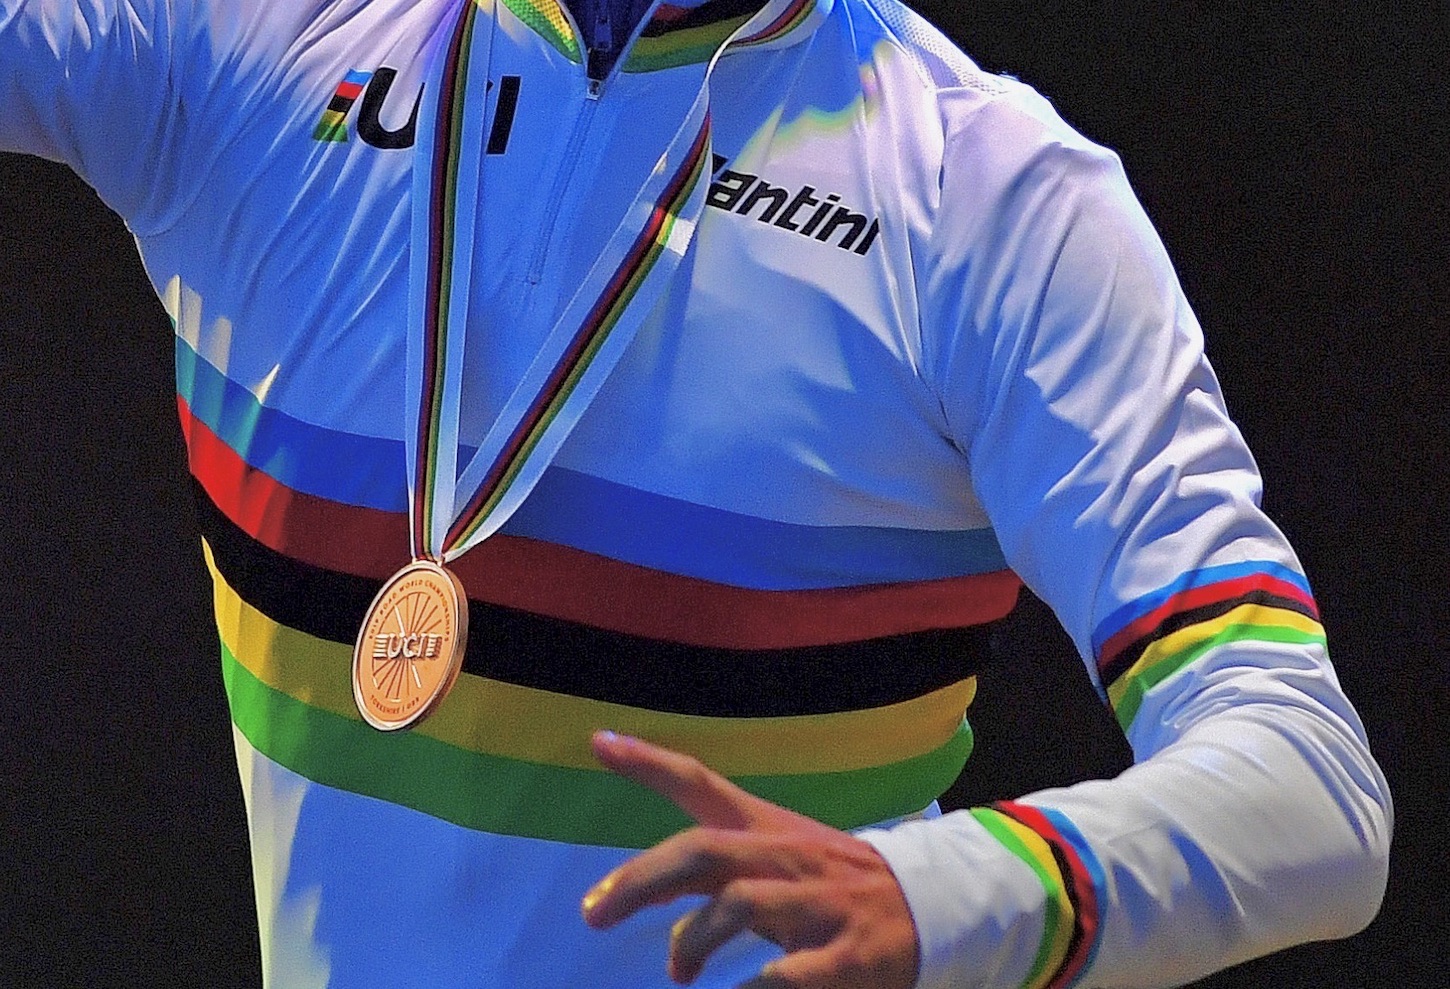 Why the World Champion's jersey is rainbow